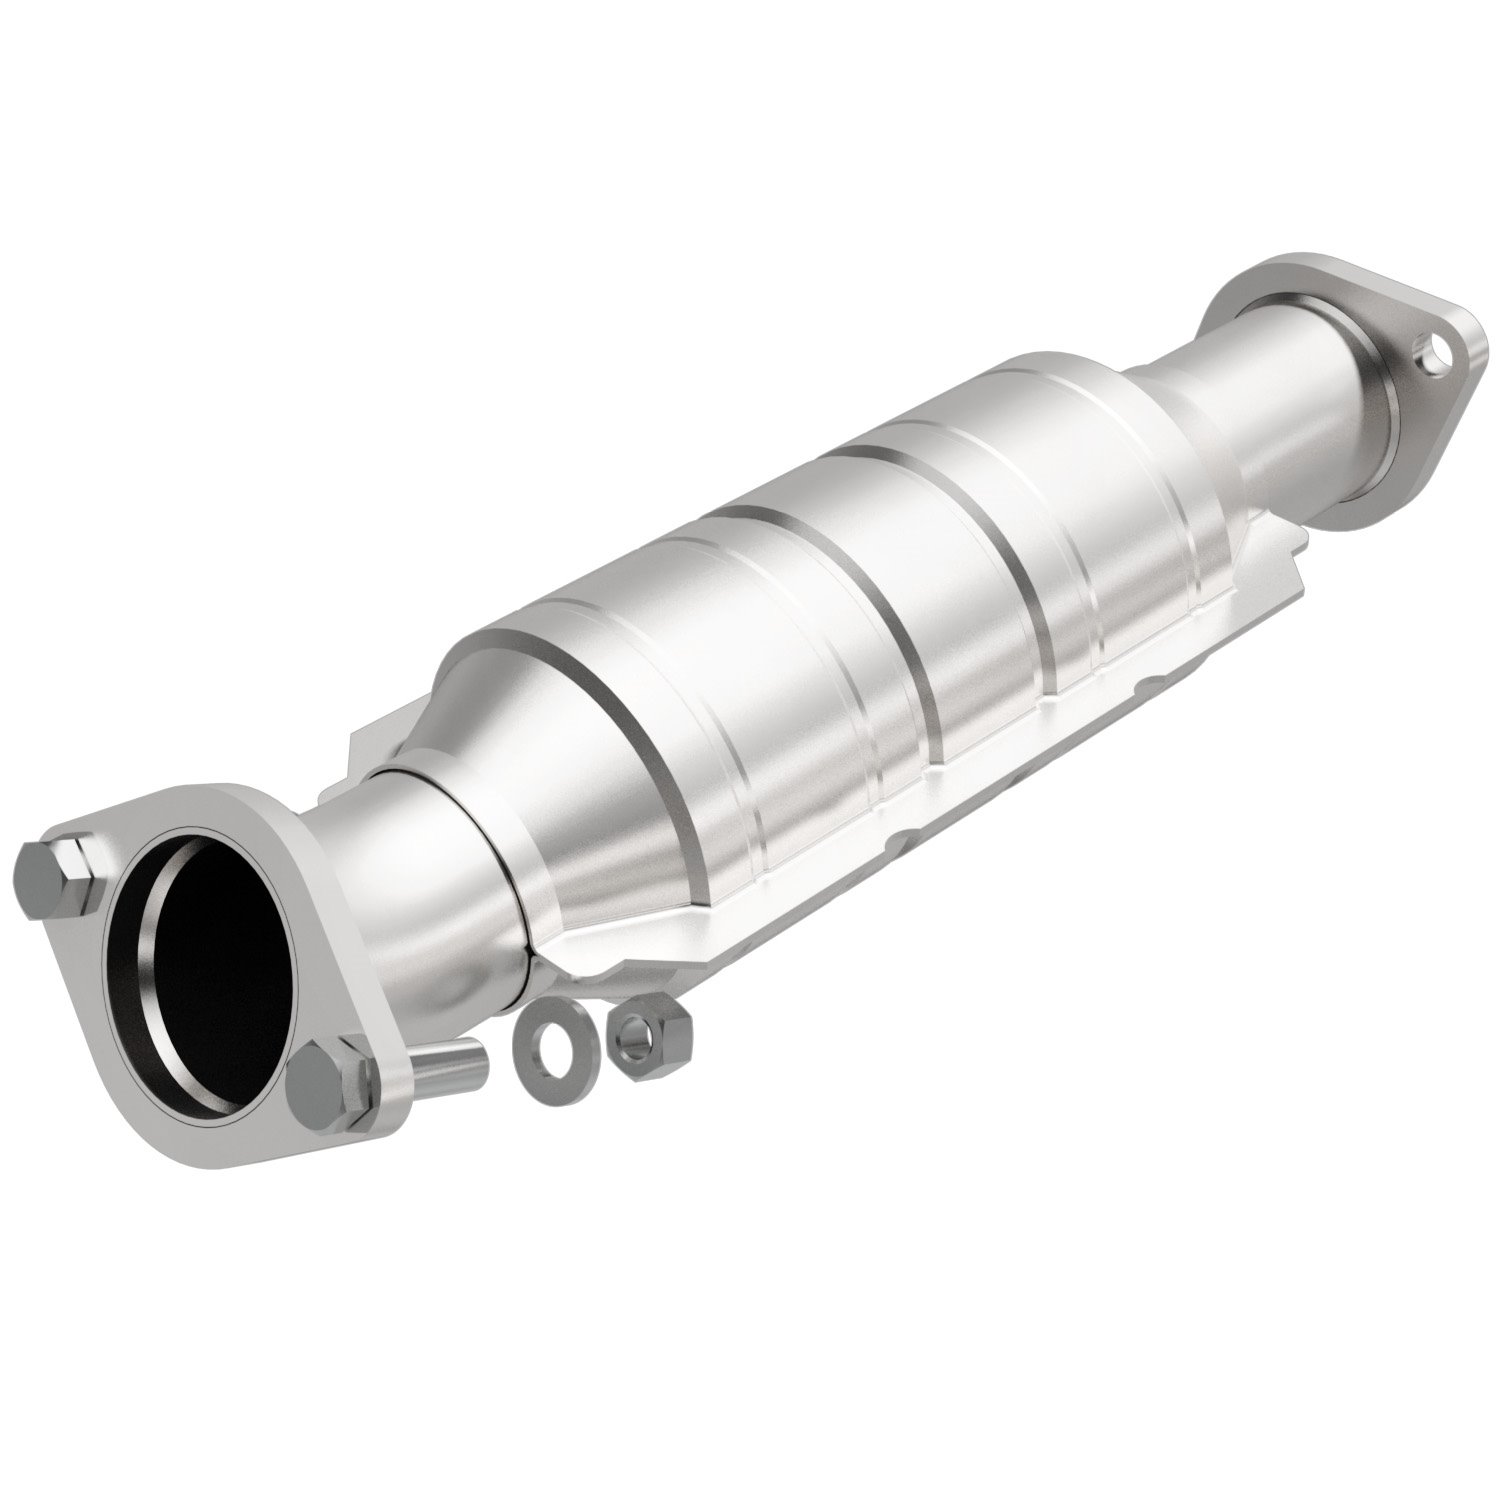 HM Grade Federal / EPA Compliant Direct-Fit Catalytic Converter 24426